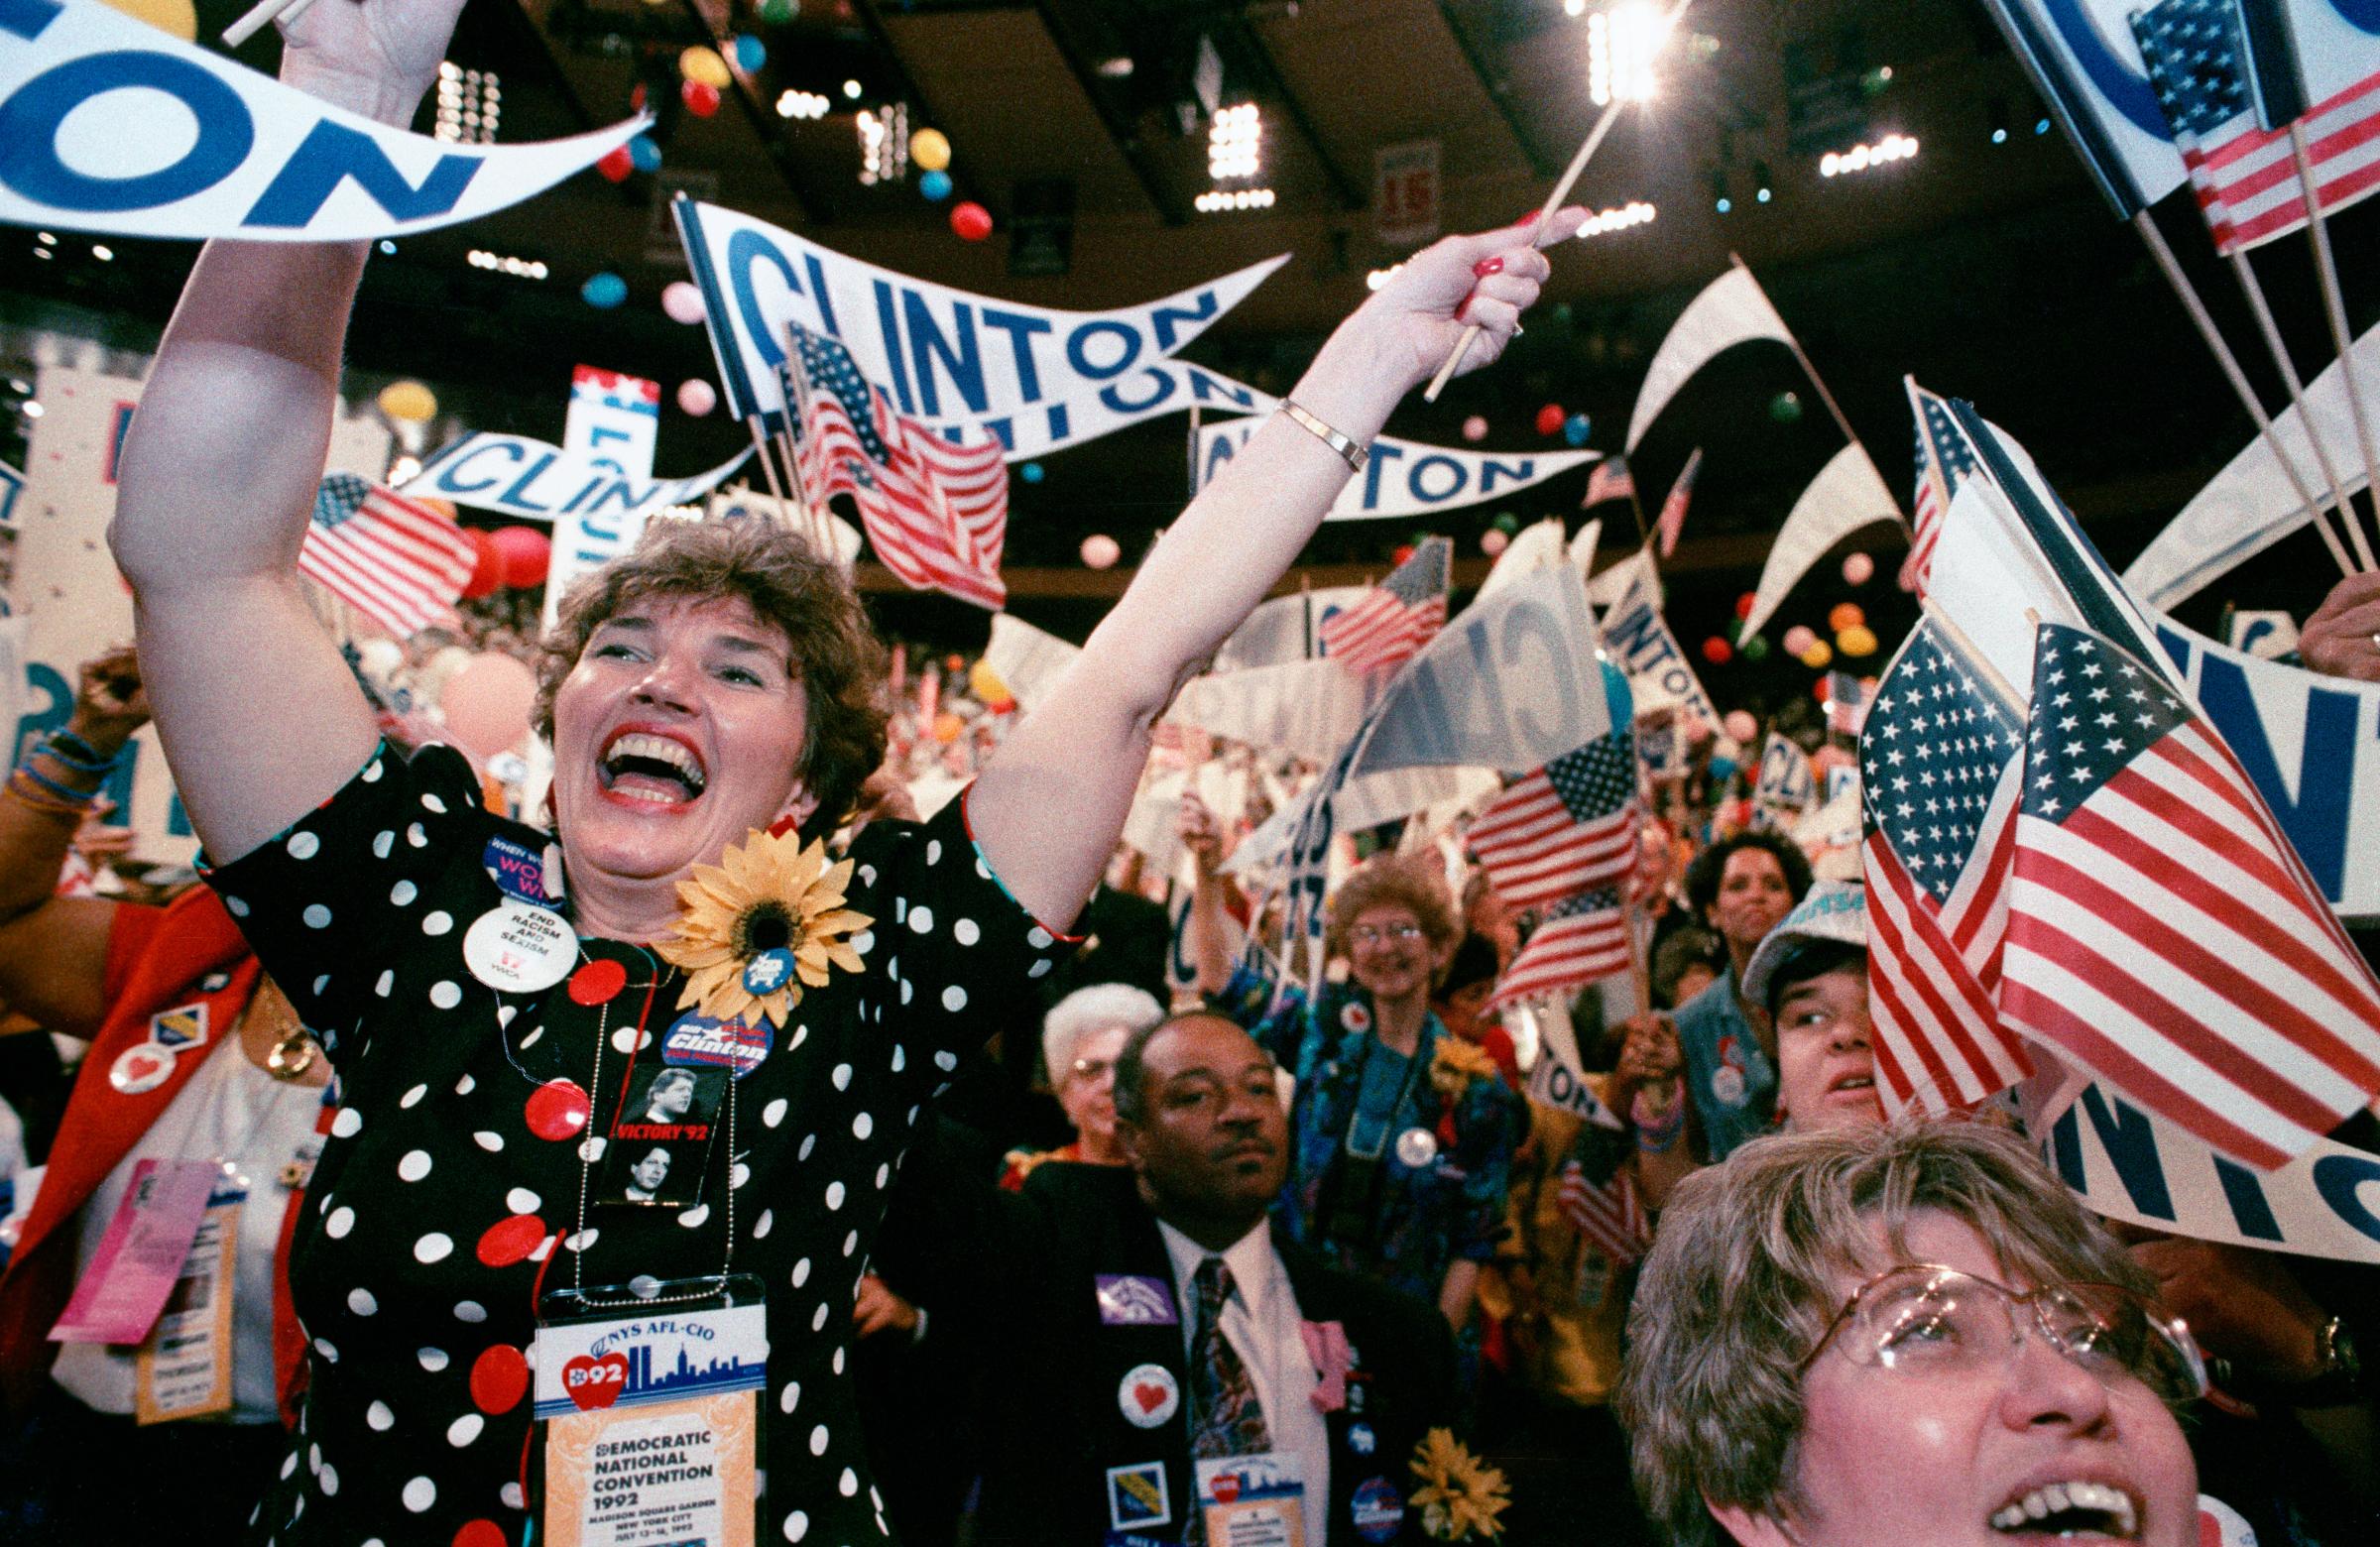 Democratic National Convention at Madison Square Garden, July 15, 1992. Supporters cheer as Gov. Bill Clinton is nominated for President on a night...